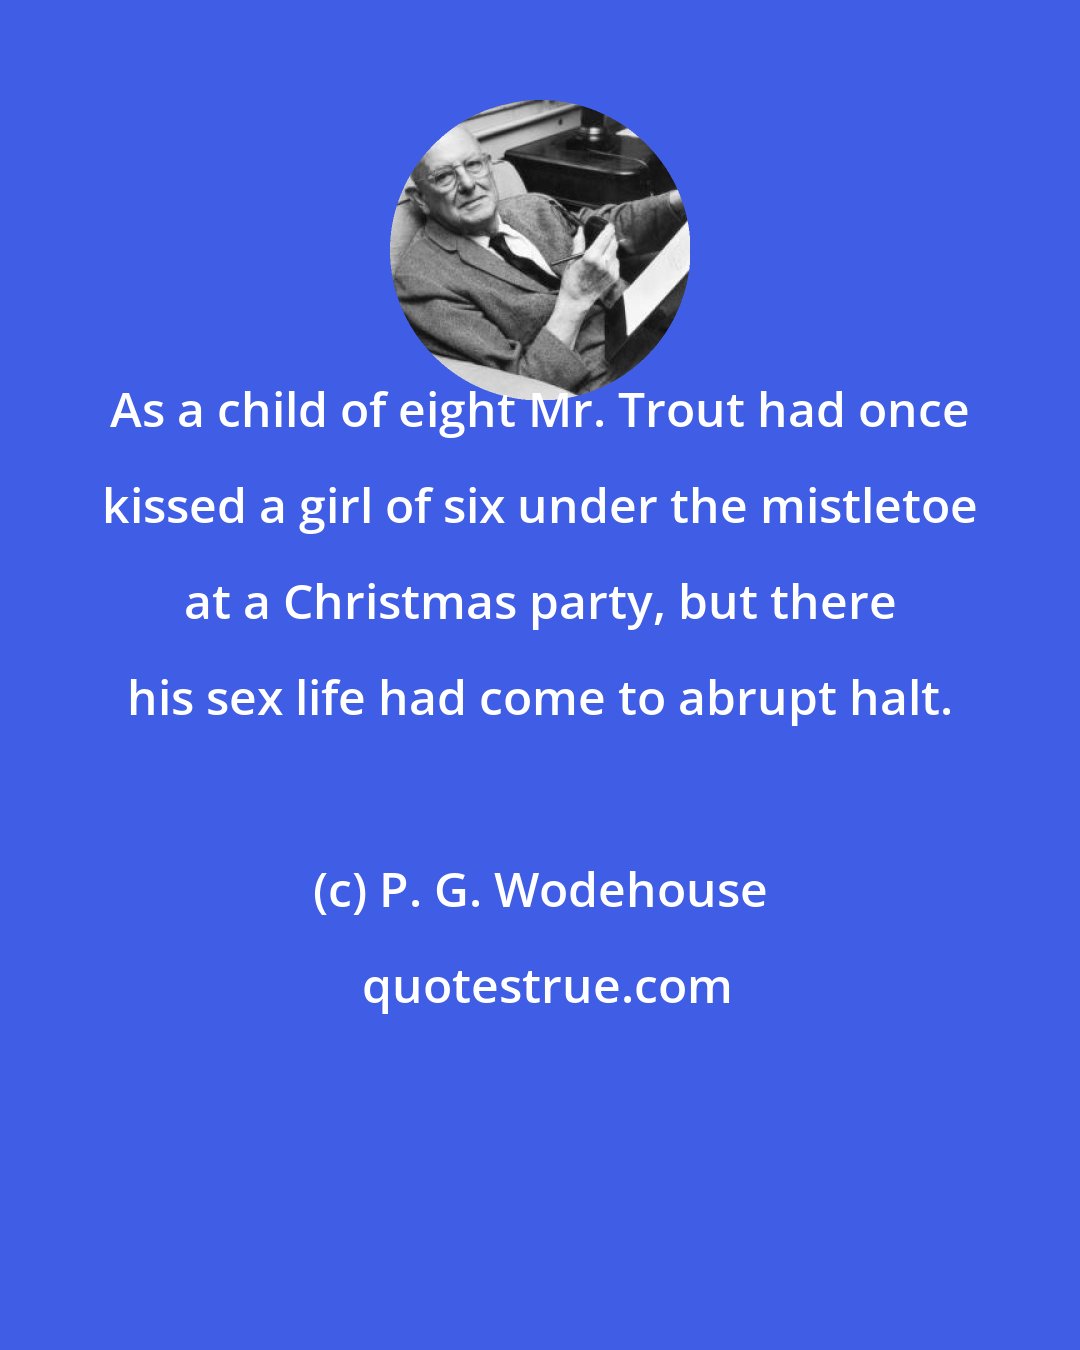 P. G. Wodehouse: As a child of eight Mr. Trout had once kissed a girl of six under the mistletoe at a Christmas party, but there his sex life had come to abrupt halt.